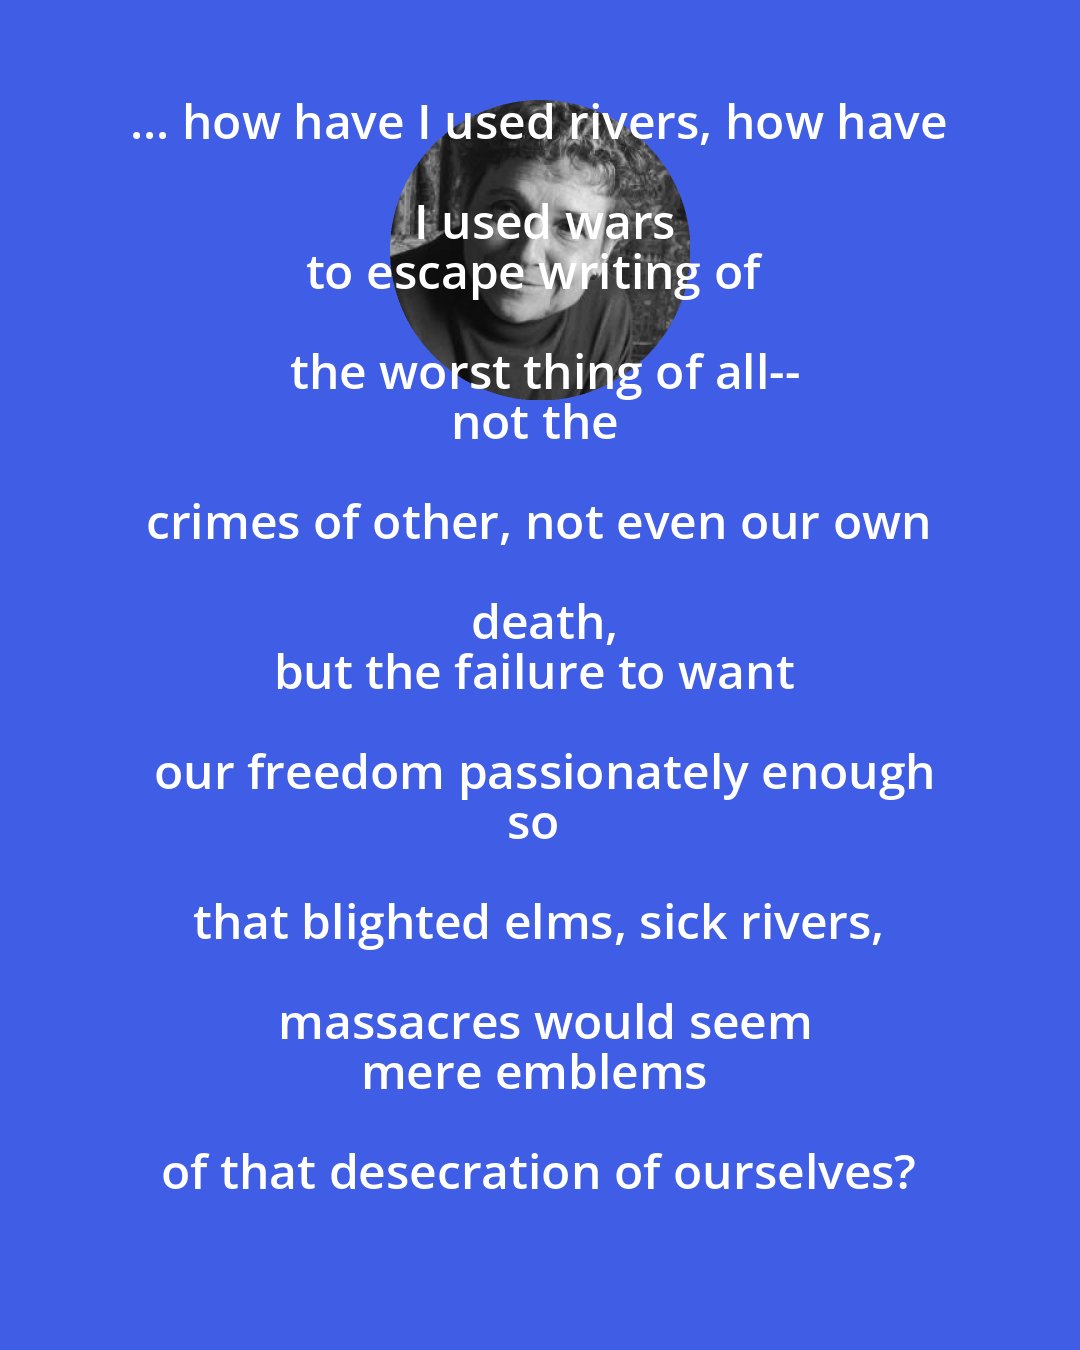 Adrienne Rich: ... how have I used rivers, how have I used wars
to escape writing of the worst thing of all--
not the crimes of other, not even our own death,
but the failure to want our freedom passionately enough
so that blighted elms, sick rivers, massacres would seem
mere emblems of that desecration of ourselves?